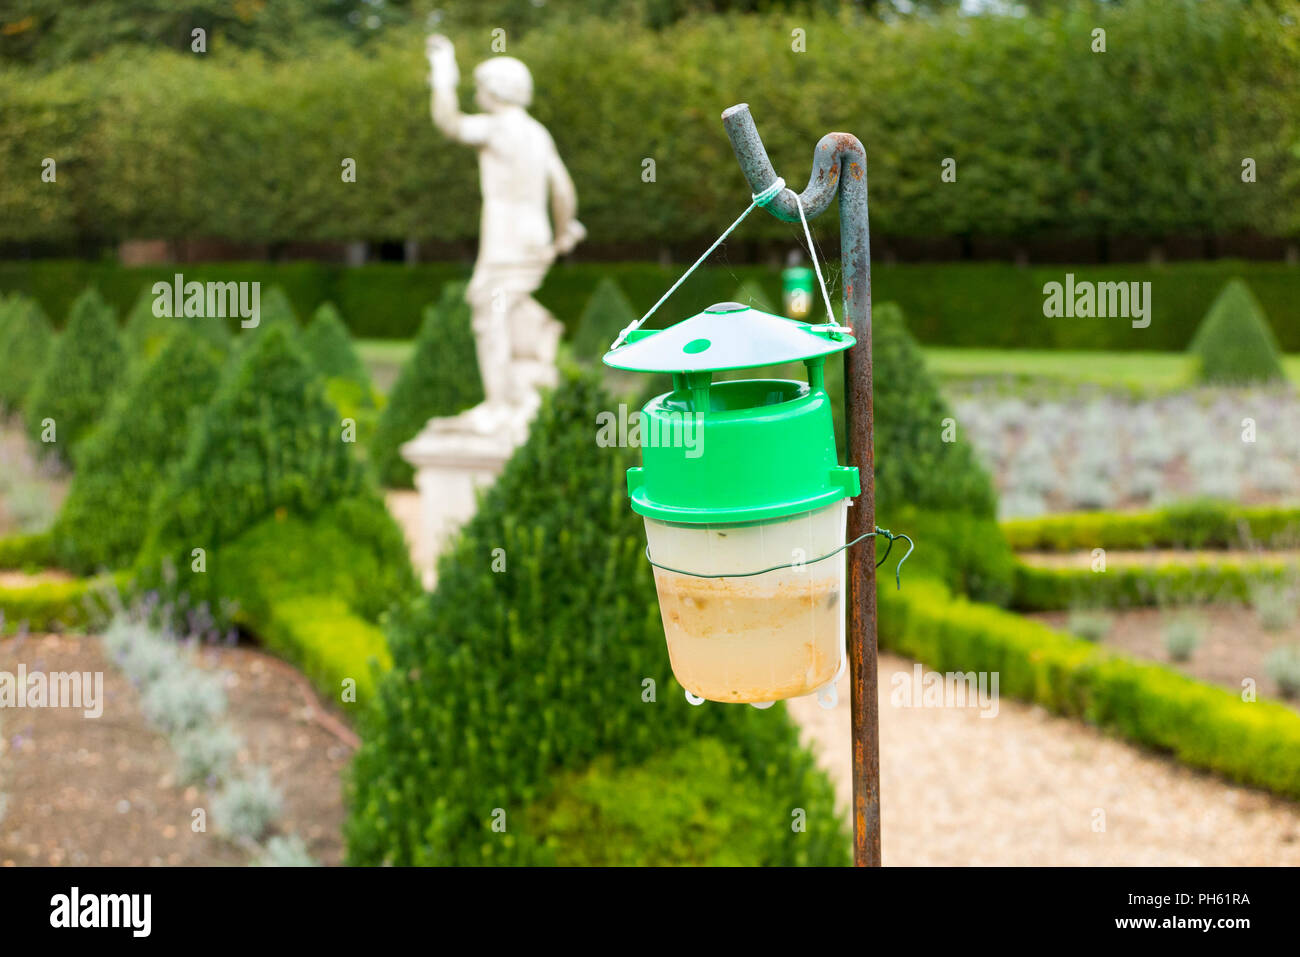 Box Tree moth trap / pheromone lure / box moth trap to catch male moths and prevent caterpillar infestation on box hedges in a formal garden. UK. (101) Stock Photo